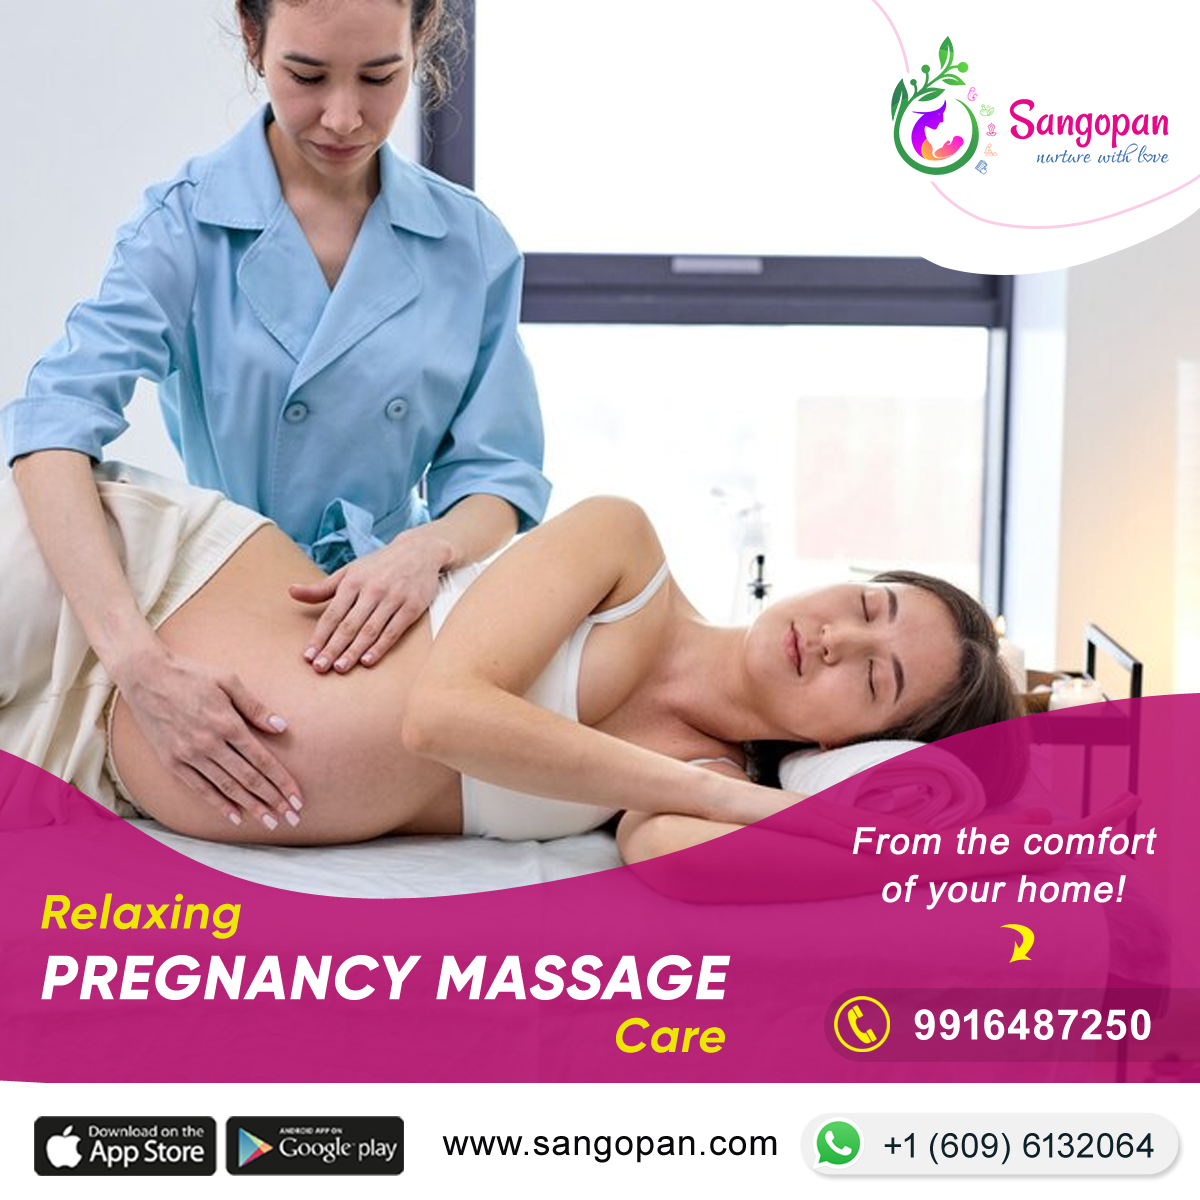 Pregnancy Massage Care from the comfort of your home! Just Call: 9916487250 sangopan.com/products/prena… #sangopan #mothercare #pregnancytips #pregnancycare #pregnancyhealth #yoga #pranayama #pregnancy #pregnancyjourney #pregnancymassage #baby #mom #workingmothers #momlife #india